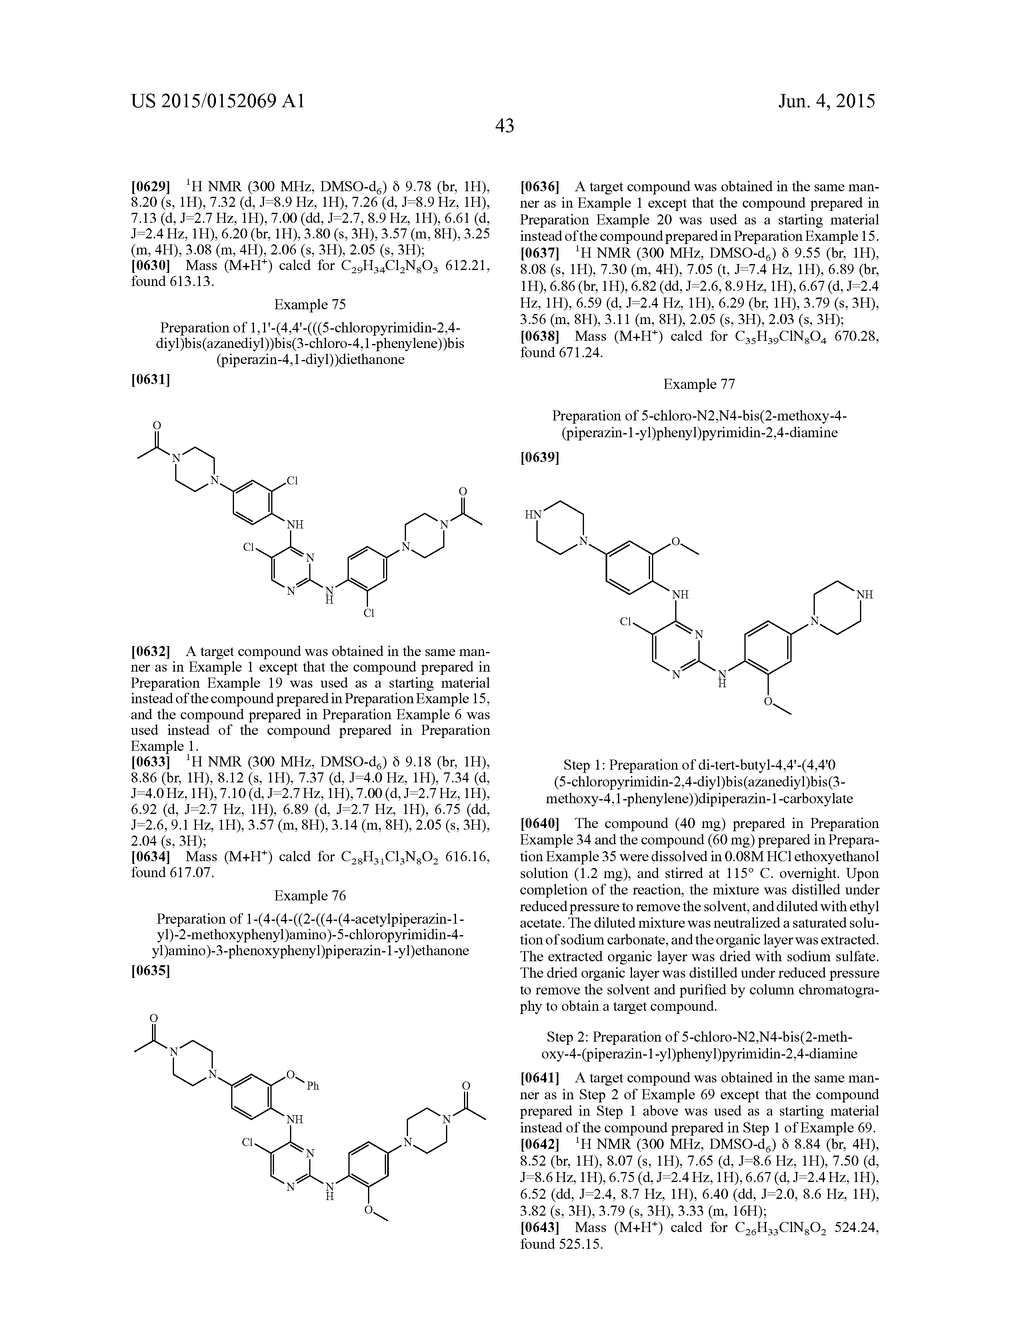 N2,N4-BIS(4-(PIPERAZINE-1-YL)PHENYL)PIRIMIDINE-2,4-DIAMINE DERIVATIVE OR     PHARMACEUTICALLY ACCEPTABLE SALT THEREOF, AND COMPOSITION CONTAINING SAME     AS ACTIVE INGREDIENT FOR PREVENTING OR TREATING CANCER - diagram, schematic, and image 47